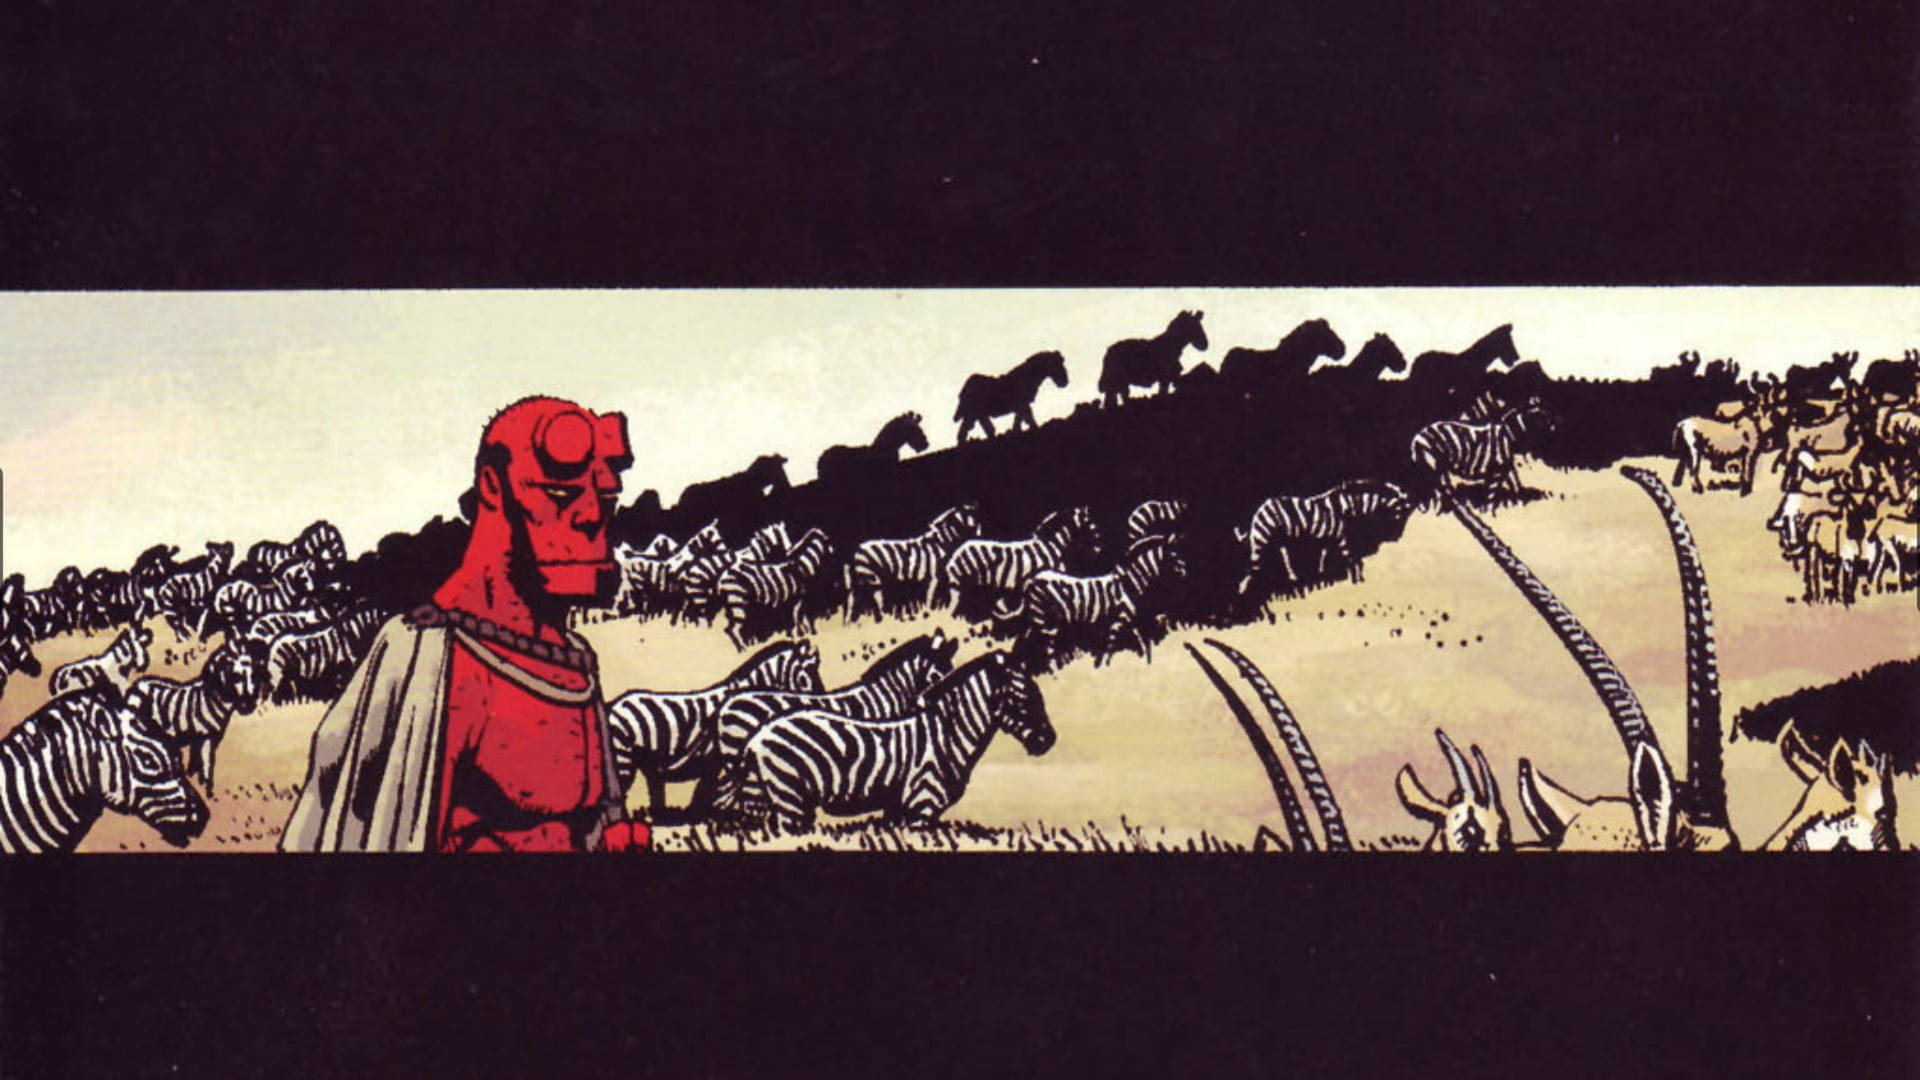 Hellboy With Group Of Zebras Background